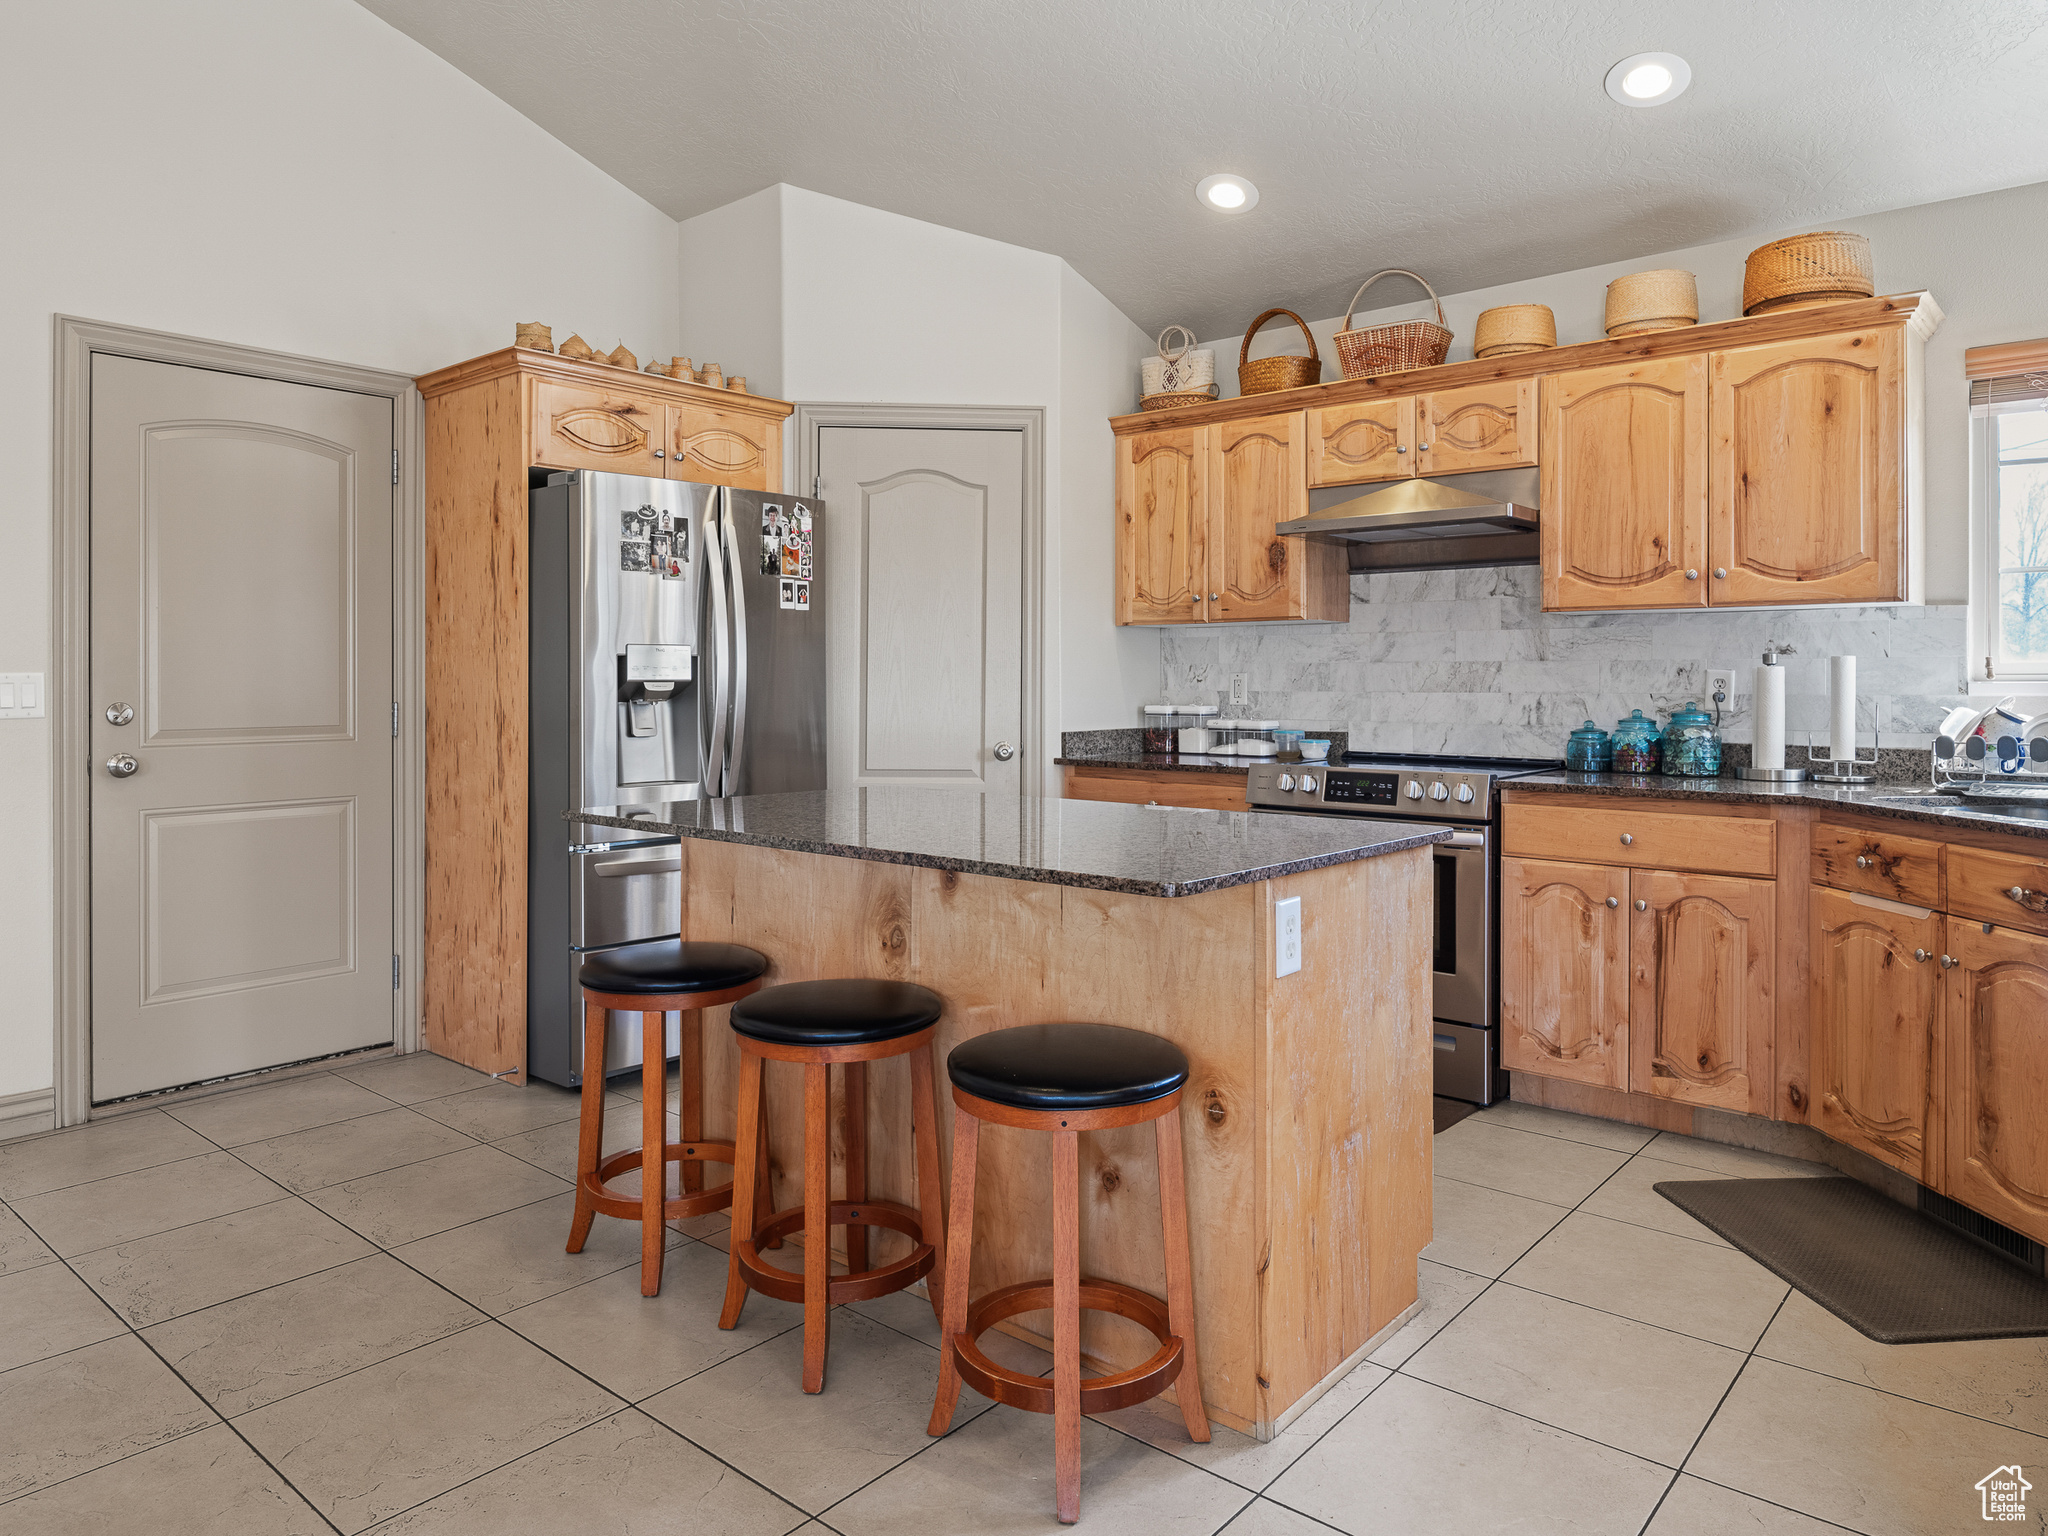 Kitchen with a kitchen island, a breakfast bar area, stainless steel appliances, dark stone countertops, and light tile floors